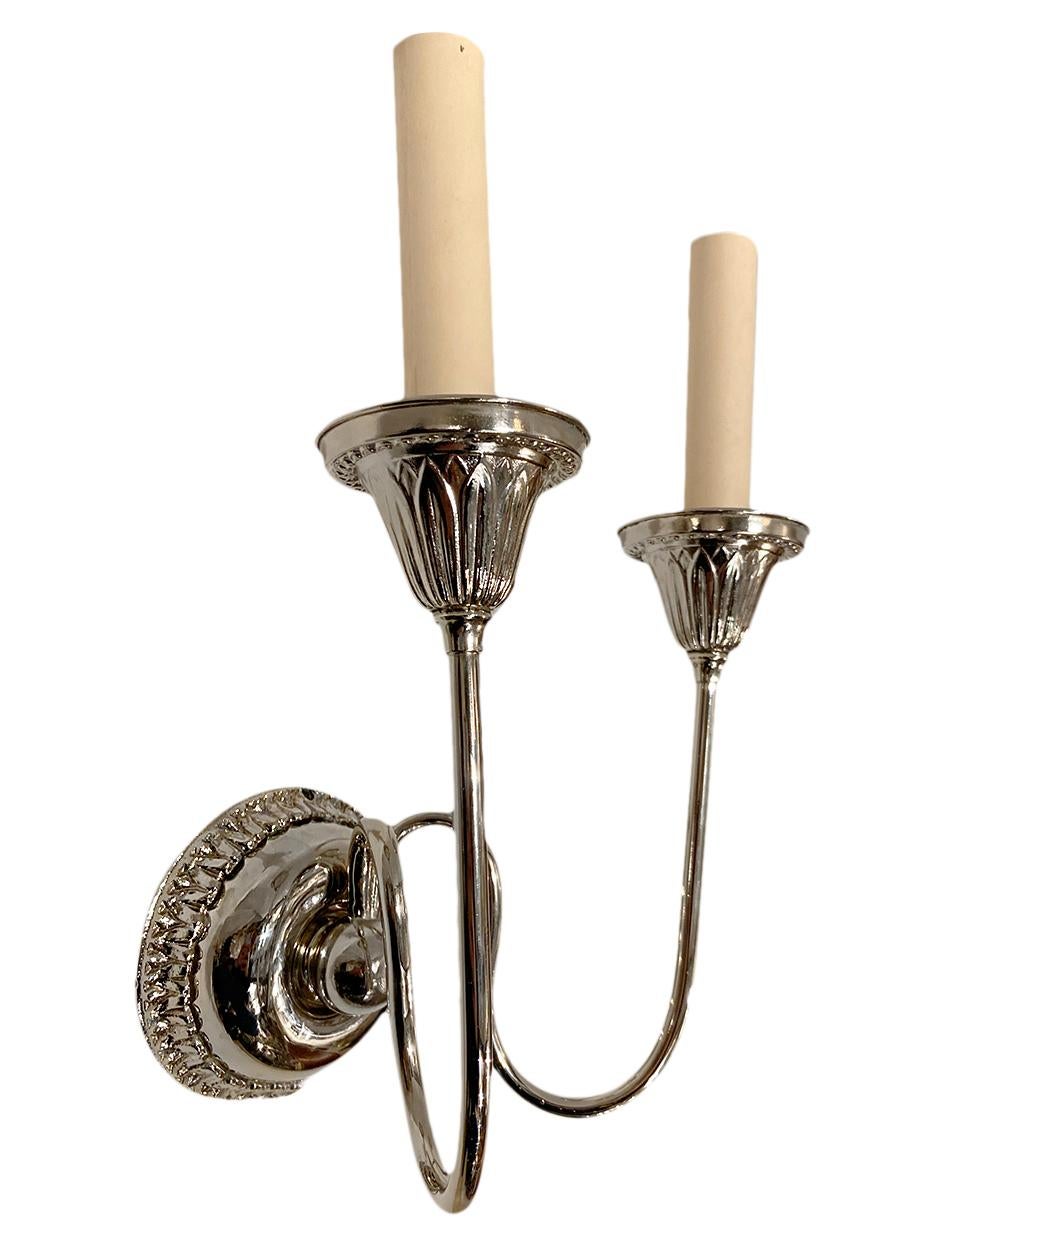 Pair of circa 1920s English neoclassic style silver plated two-arm sconces.

Measurements:
Height 11.5